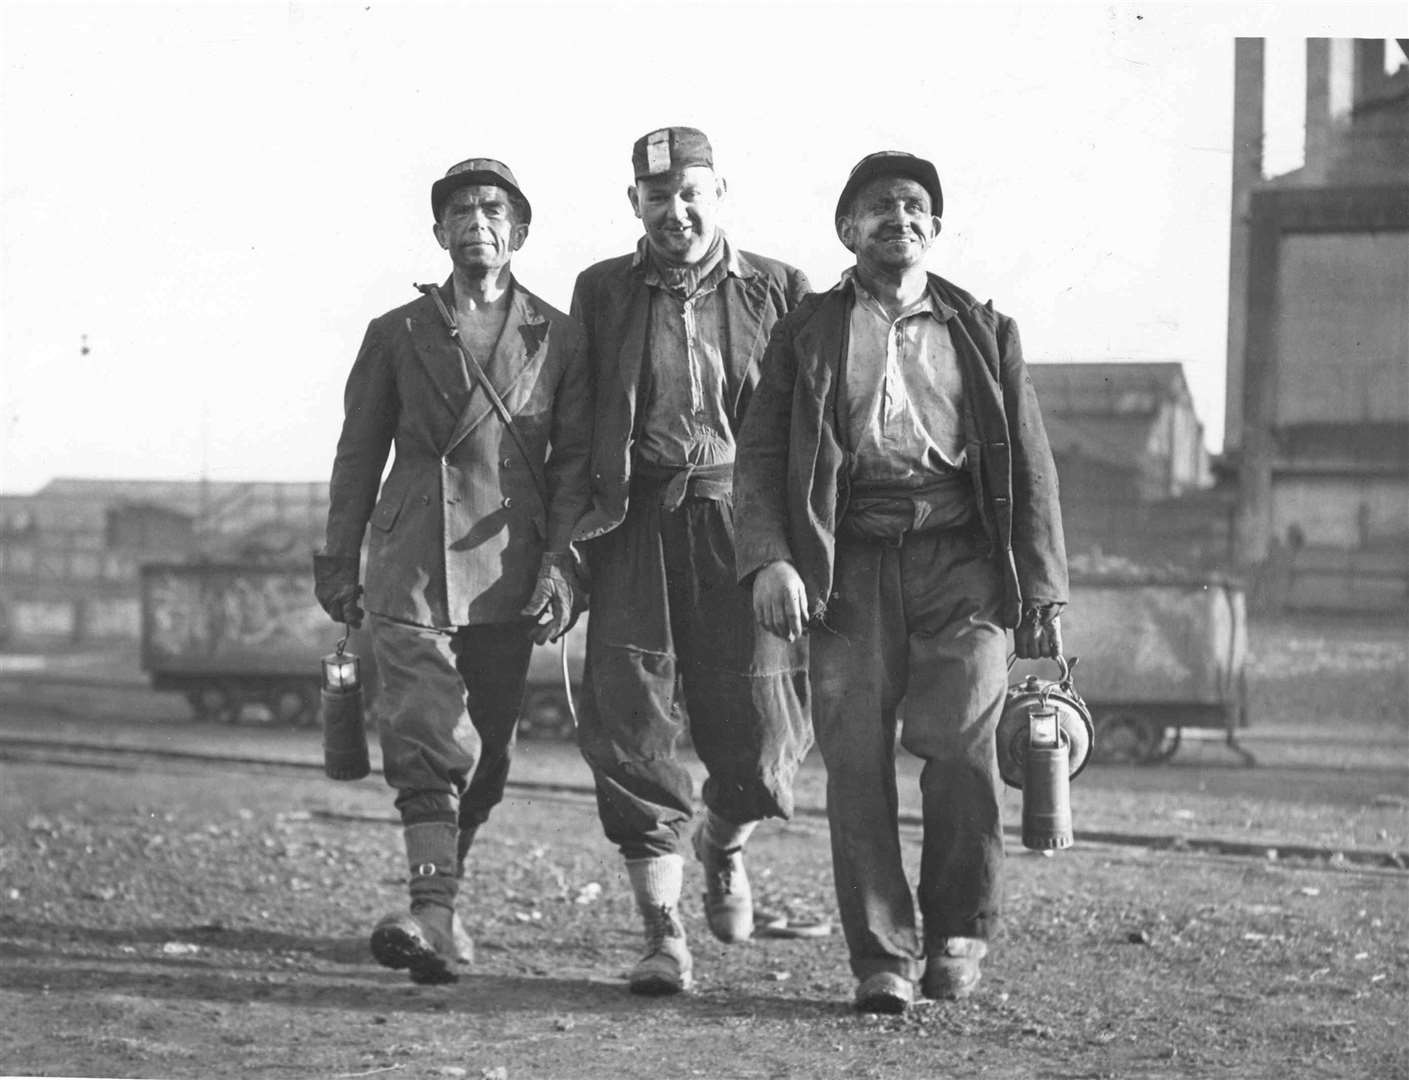 This picture shows three of the miners leaving the pit. l to r: T A K Shipwright, an ex RAF Officer who was invalided after serving twenty six years and volunteered for the mines last September, George Daughtrey, who started work in the Yorkshire pits at the age of 14, and Jack Adams who came from the Welsh mines to Kent. George Daughtrey will introduce Shipwright. Picture supplied by BBC